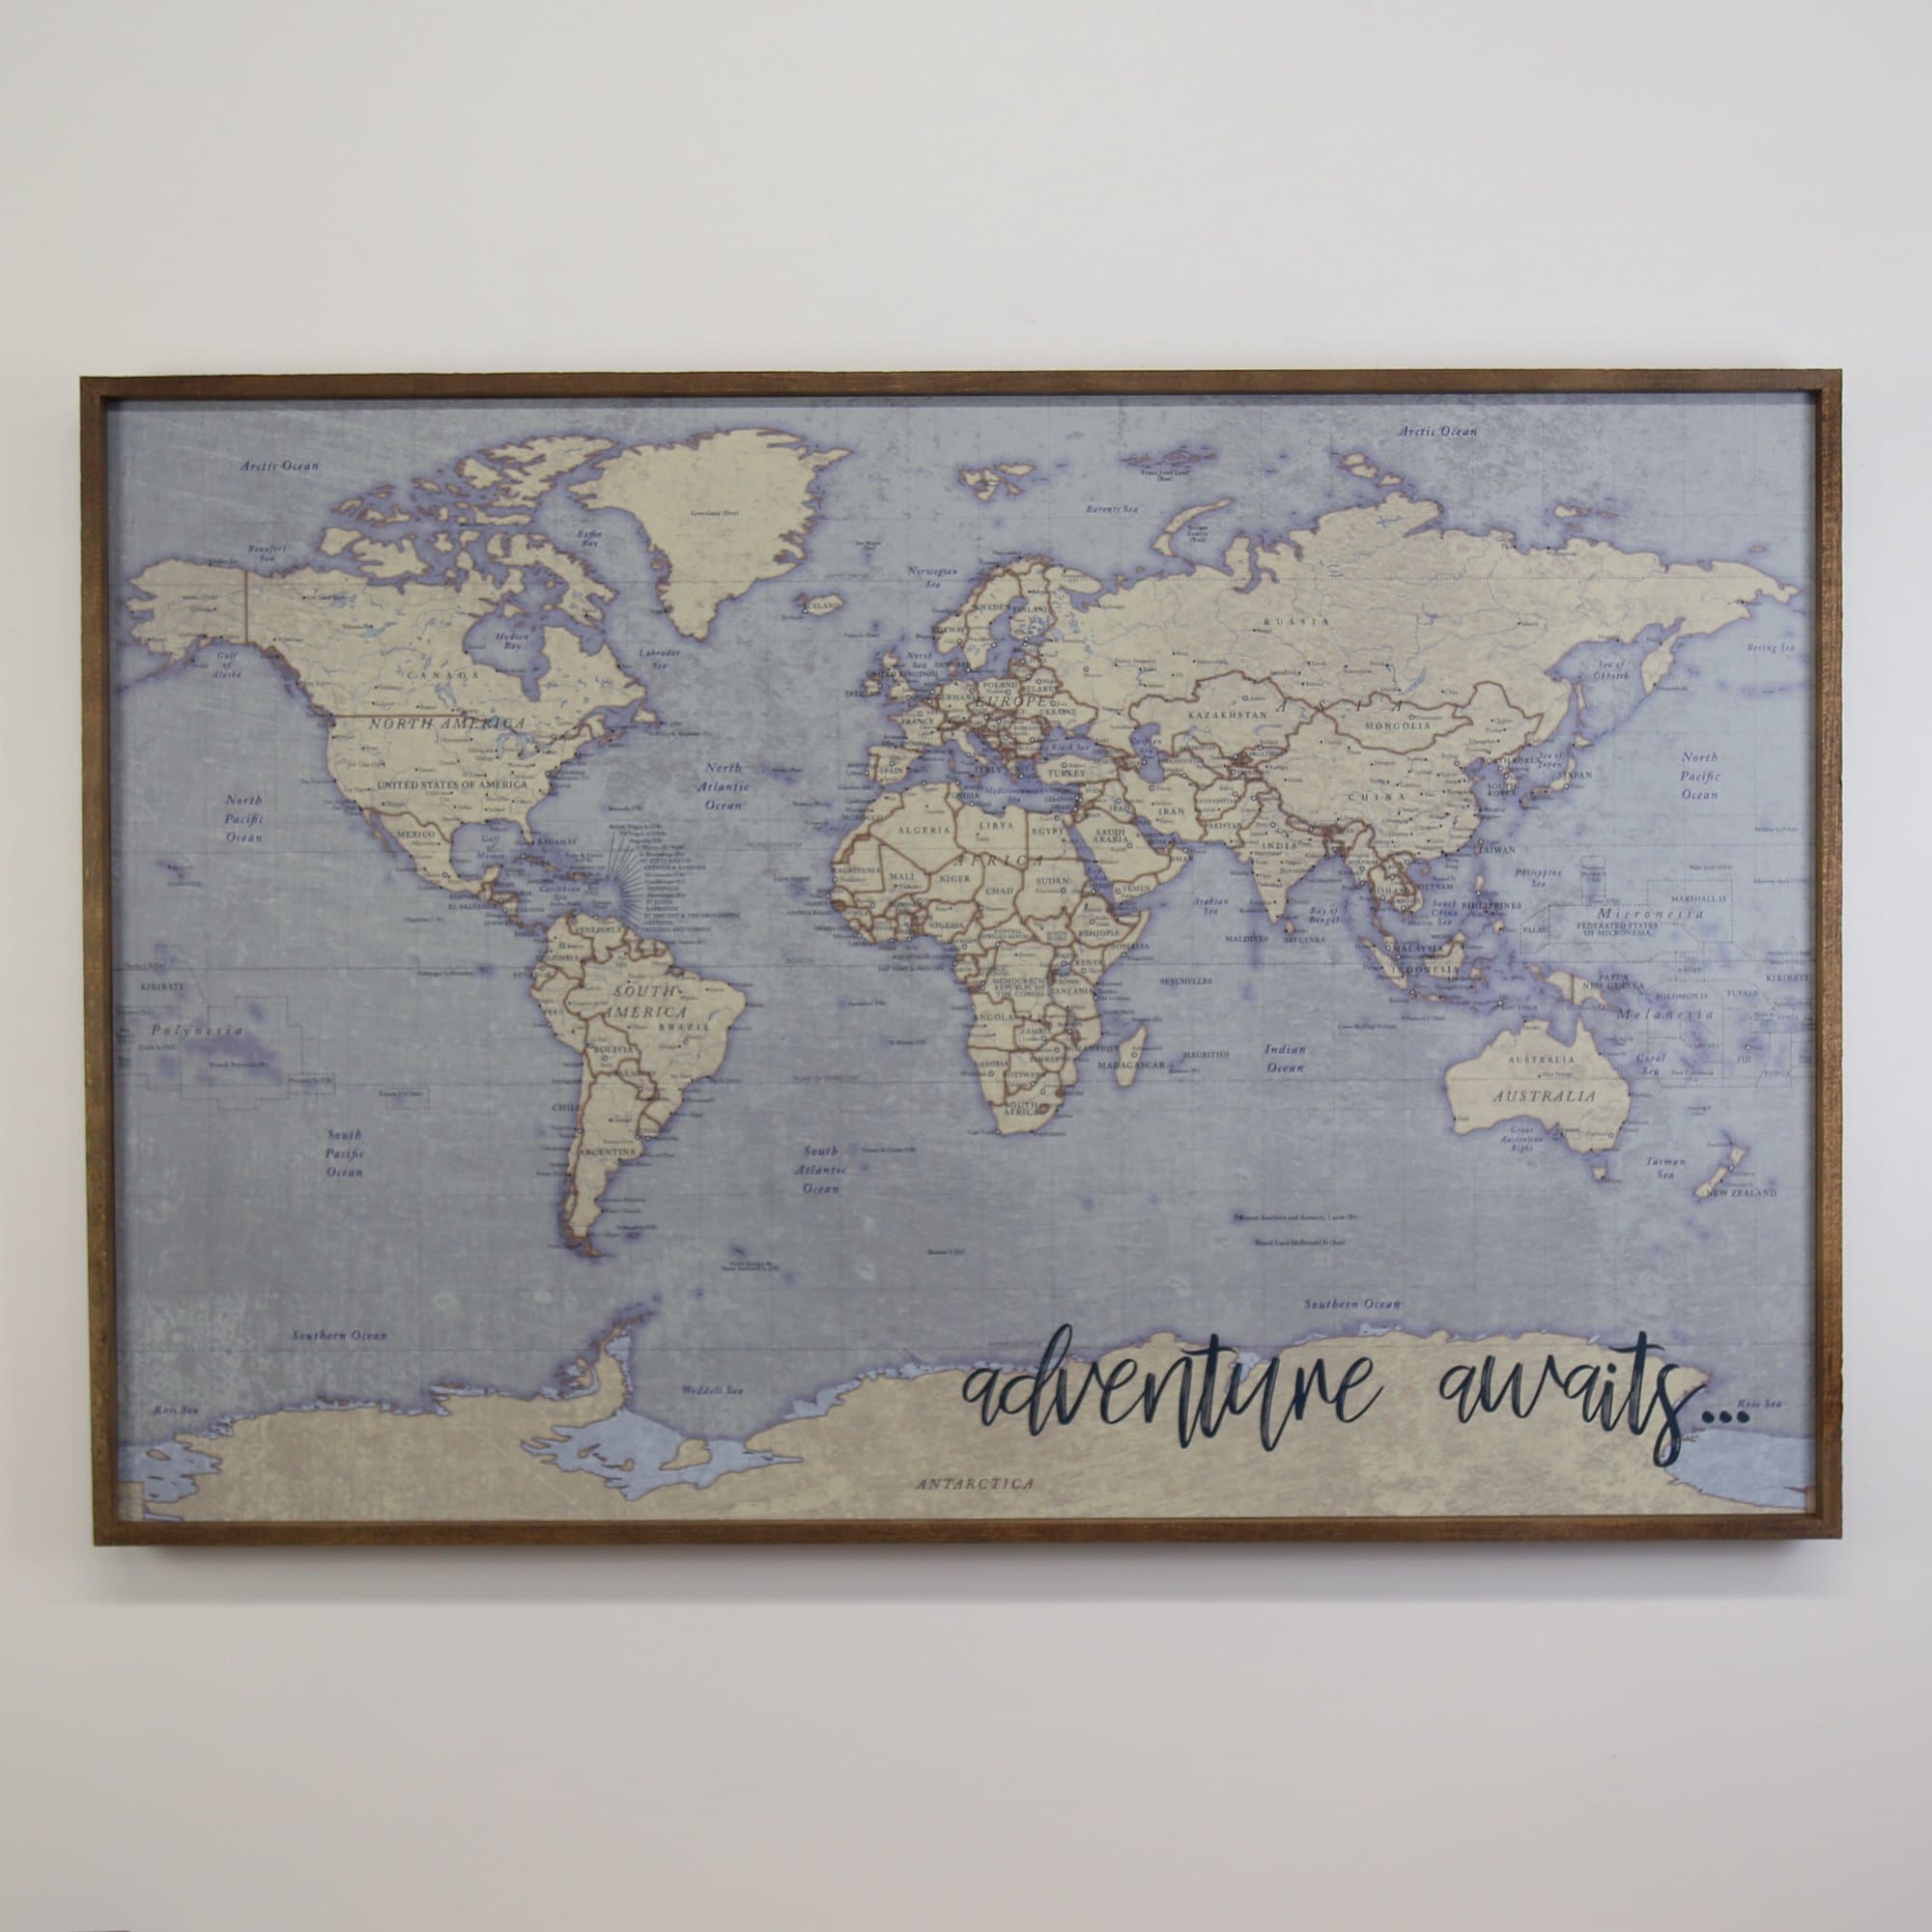 World Map Framed W33xH22 Black Patented Magnetic Back w/30 Pins